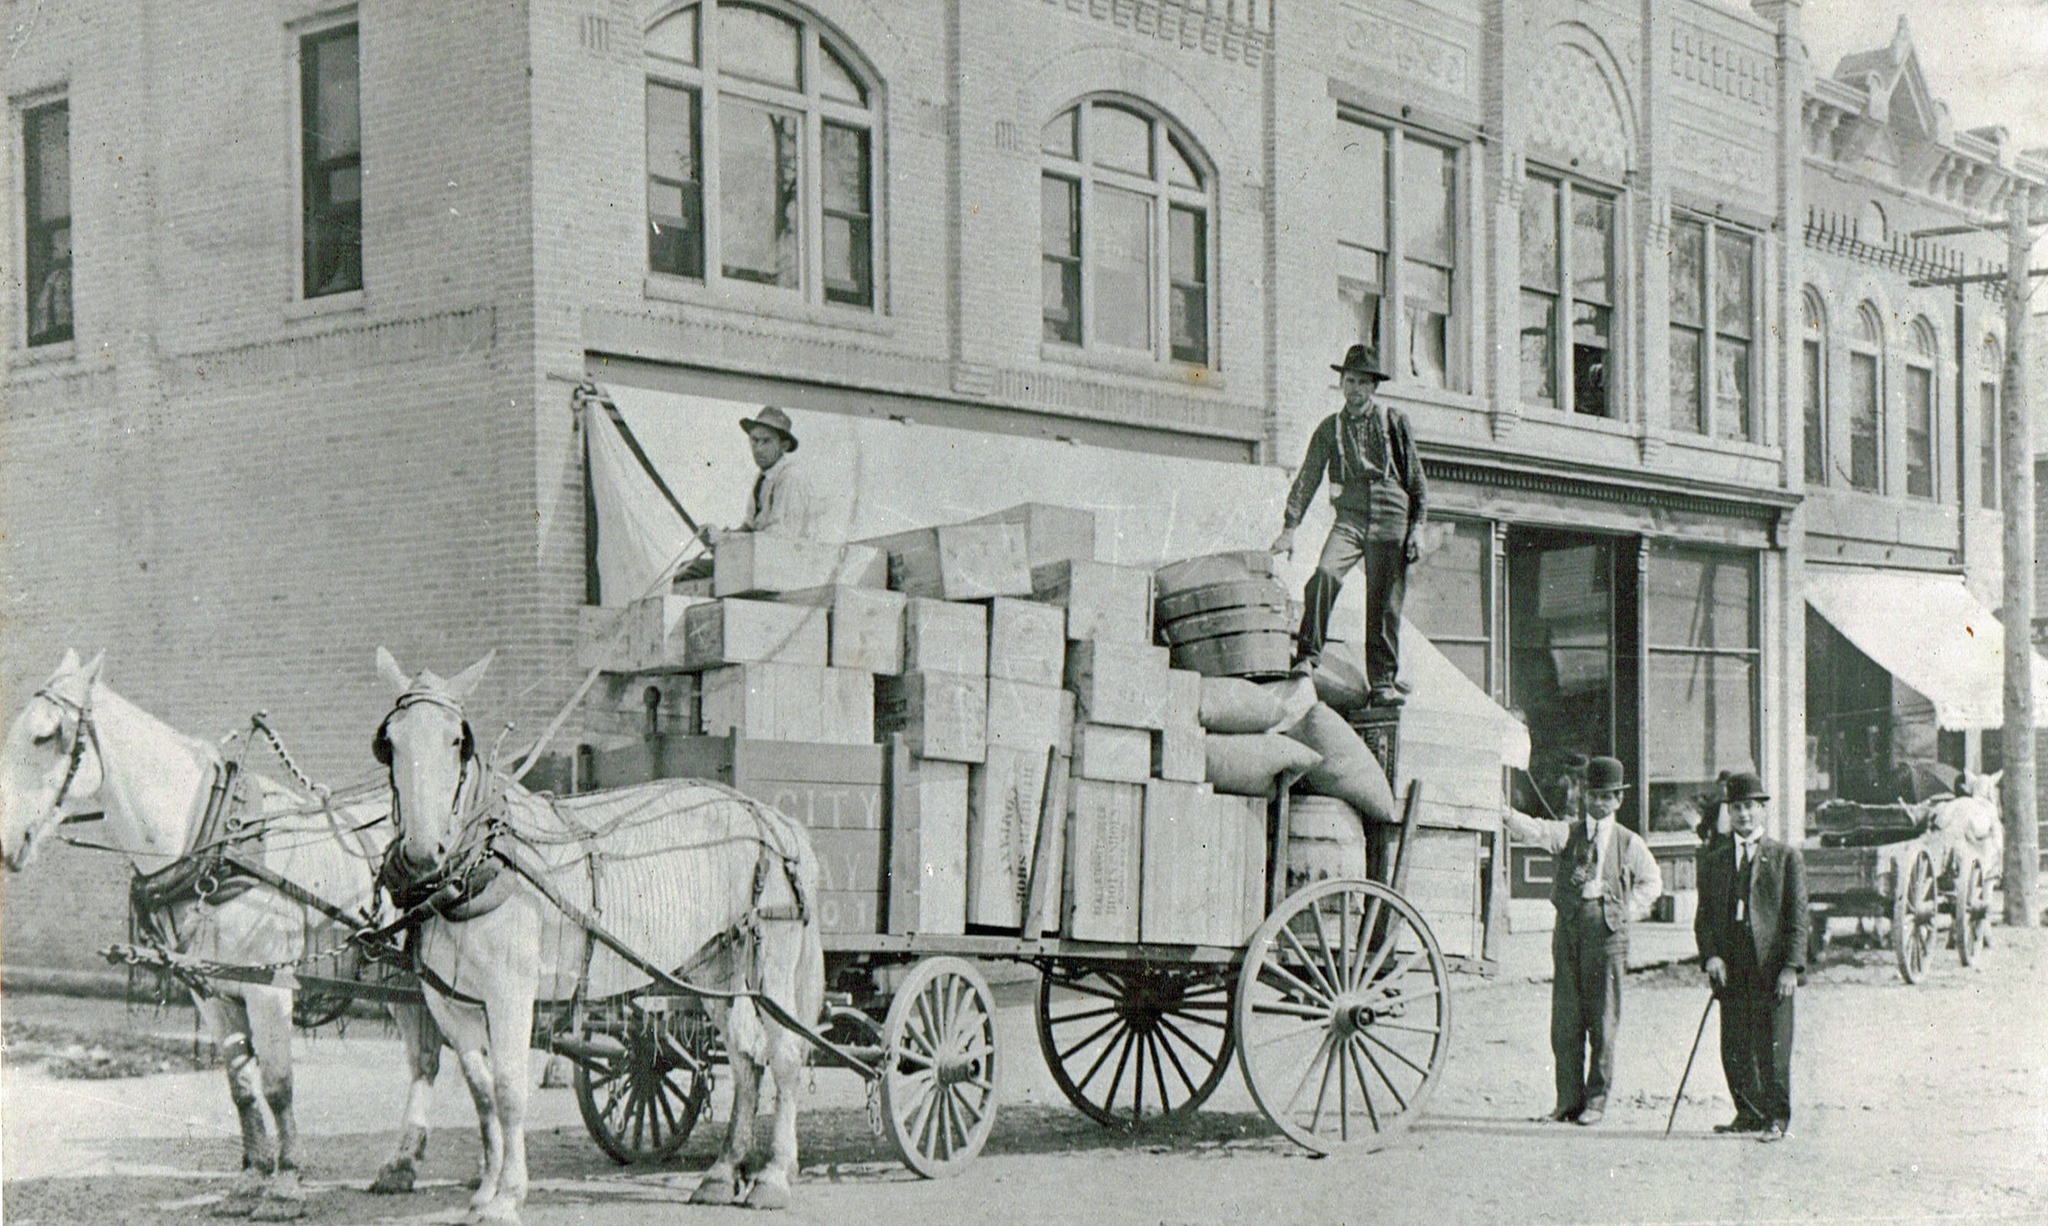 Carriage stocked with merchandise, ca. 1905-1910.